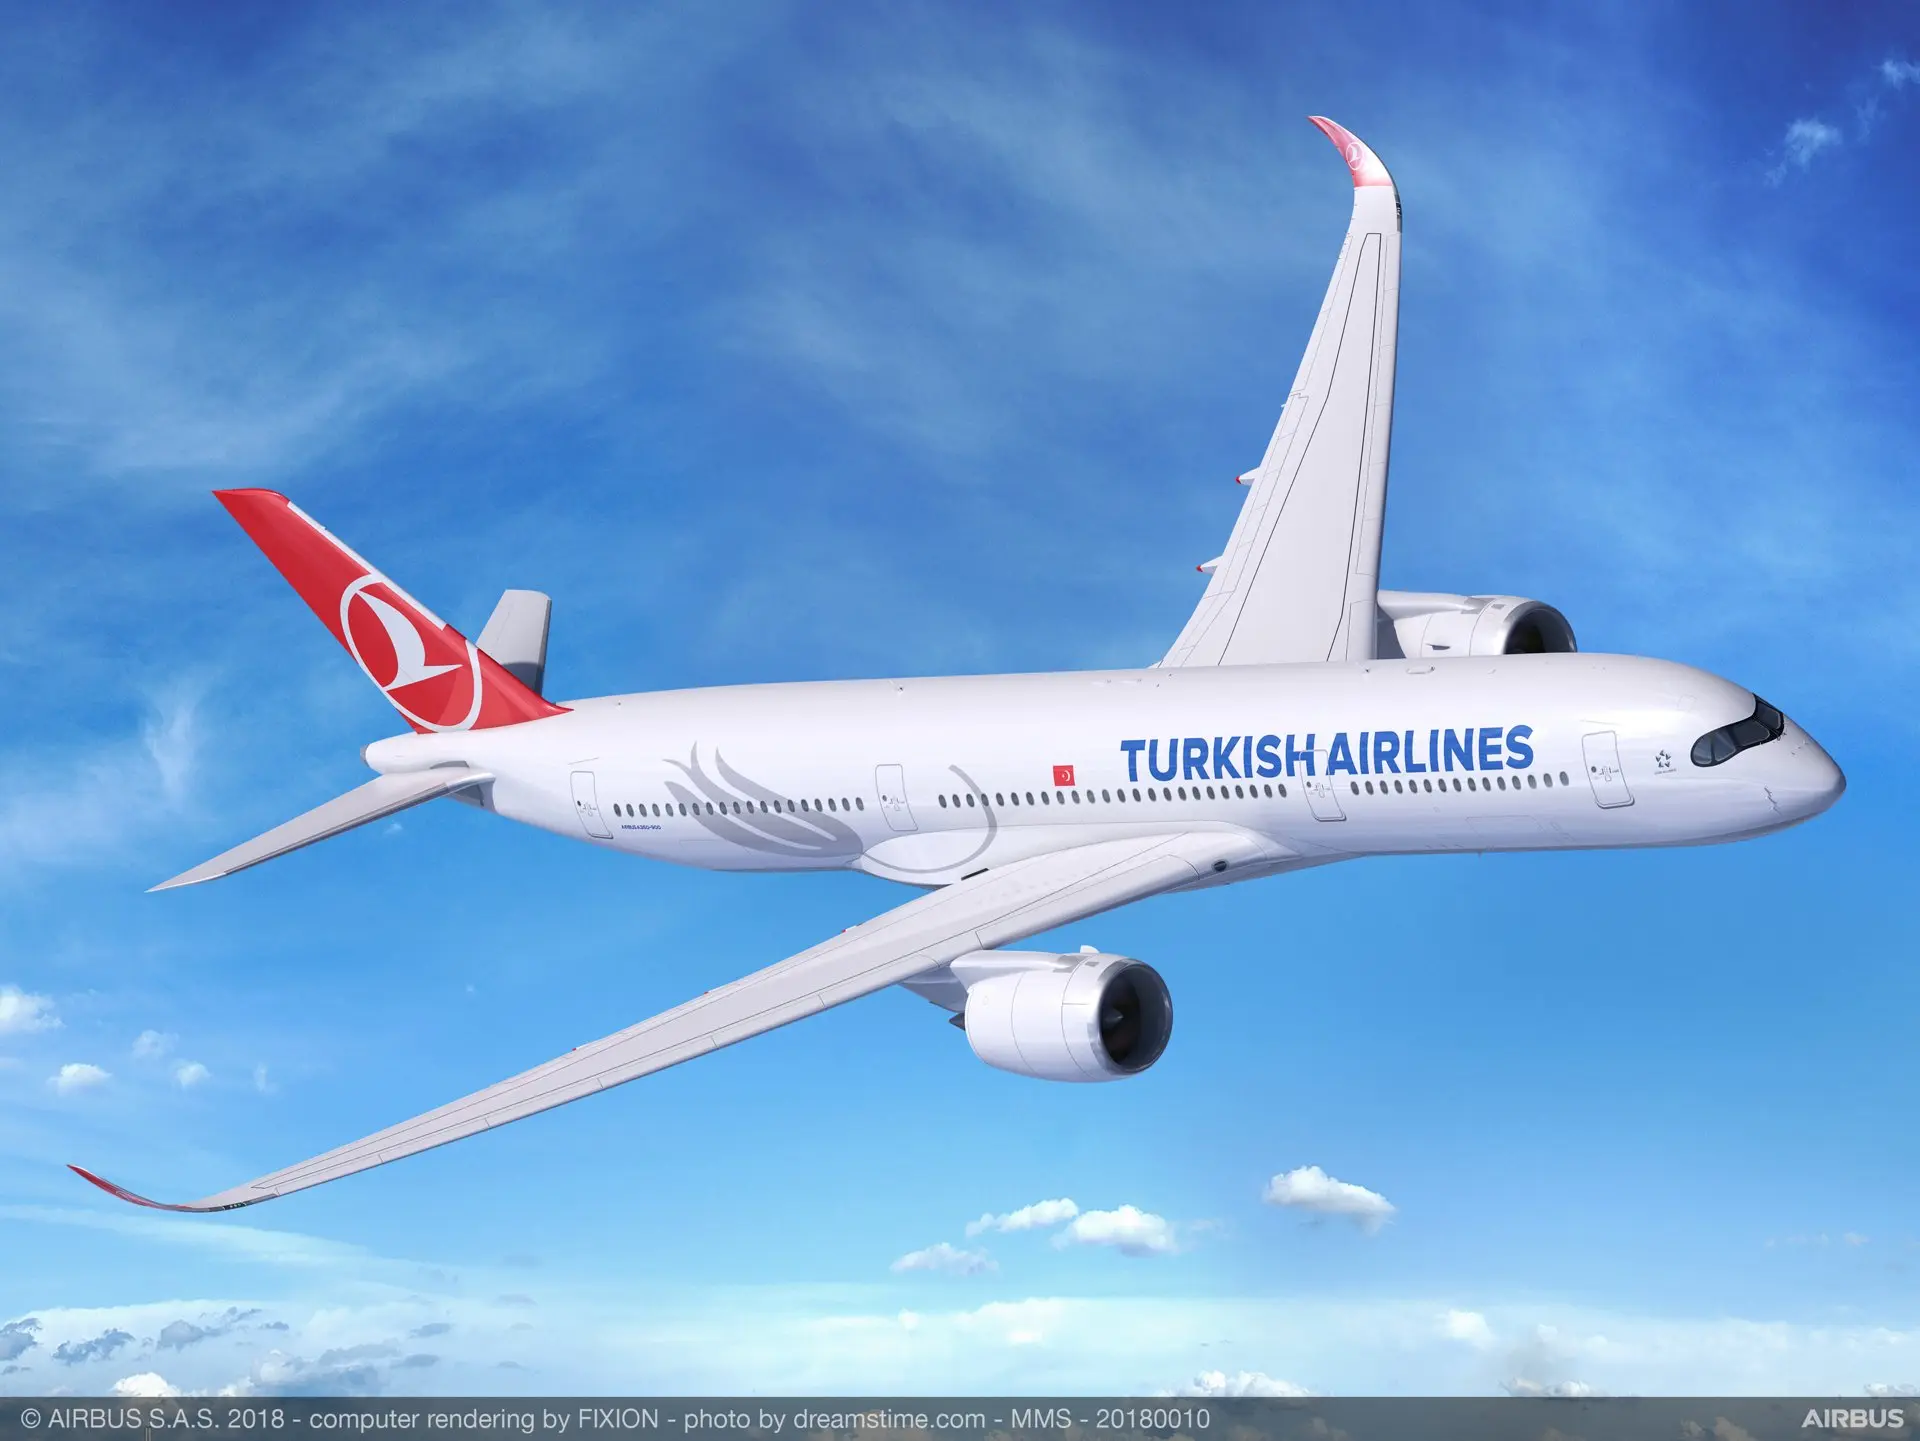 Airlines News - Turkish Airlines brand new Airbus A350-900